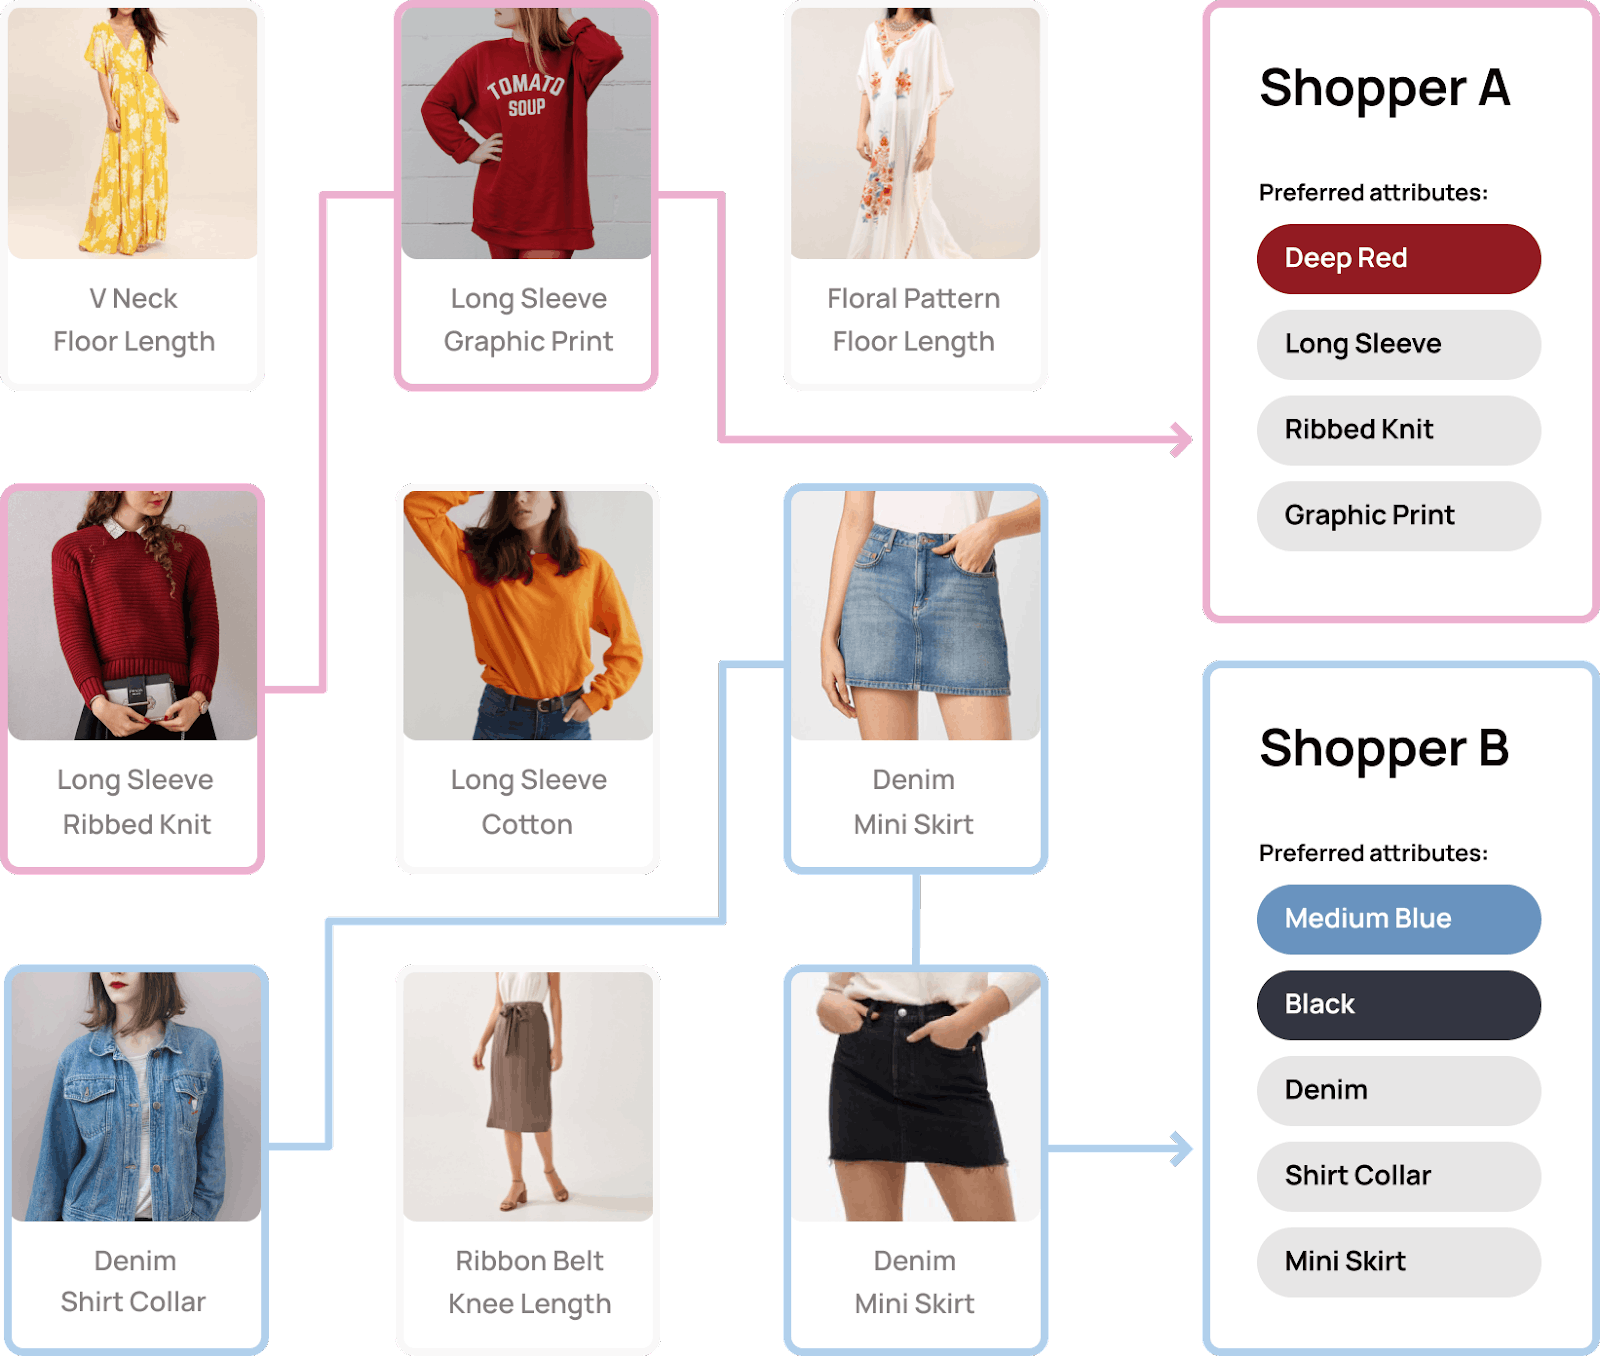 Rosetta AI's preferences analytics can generate real-time shopper's profile